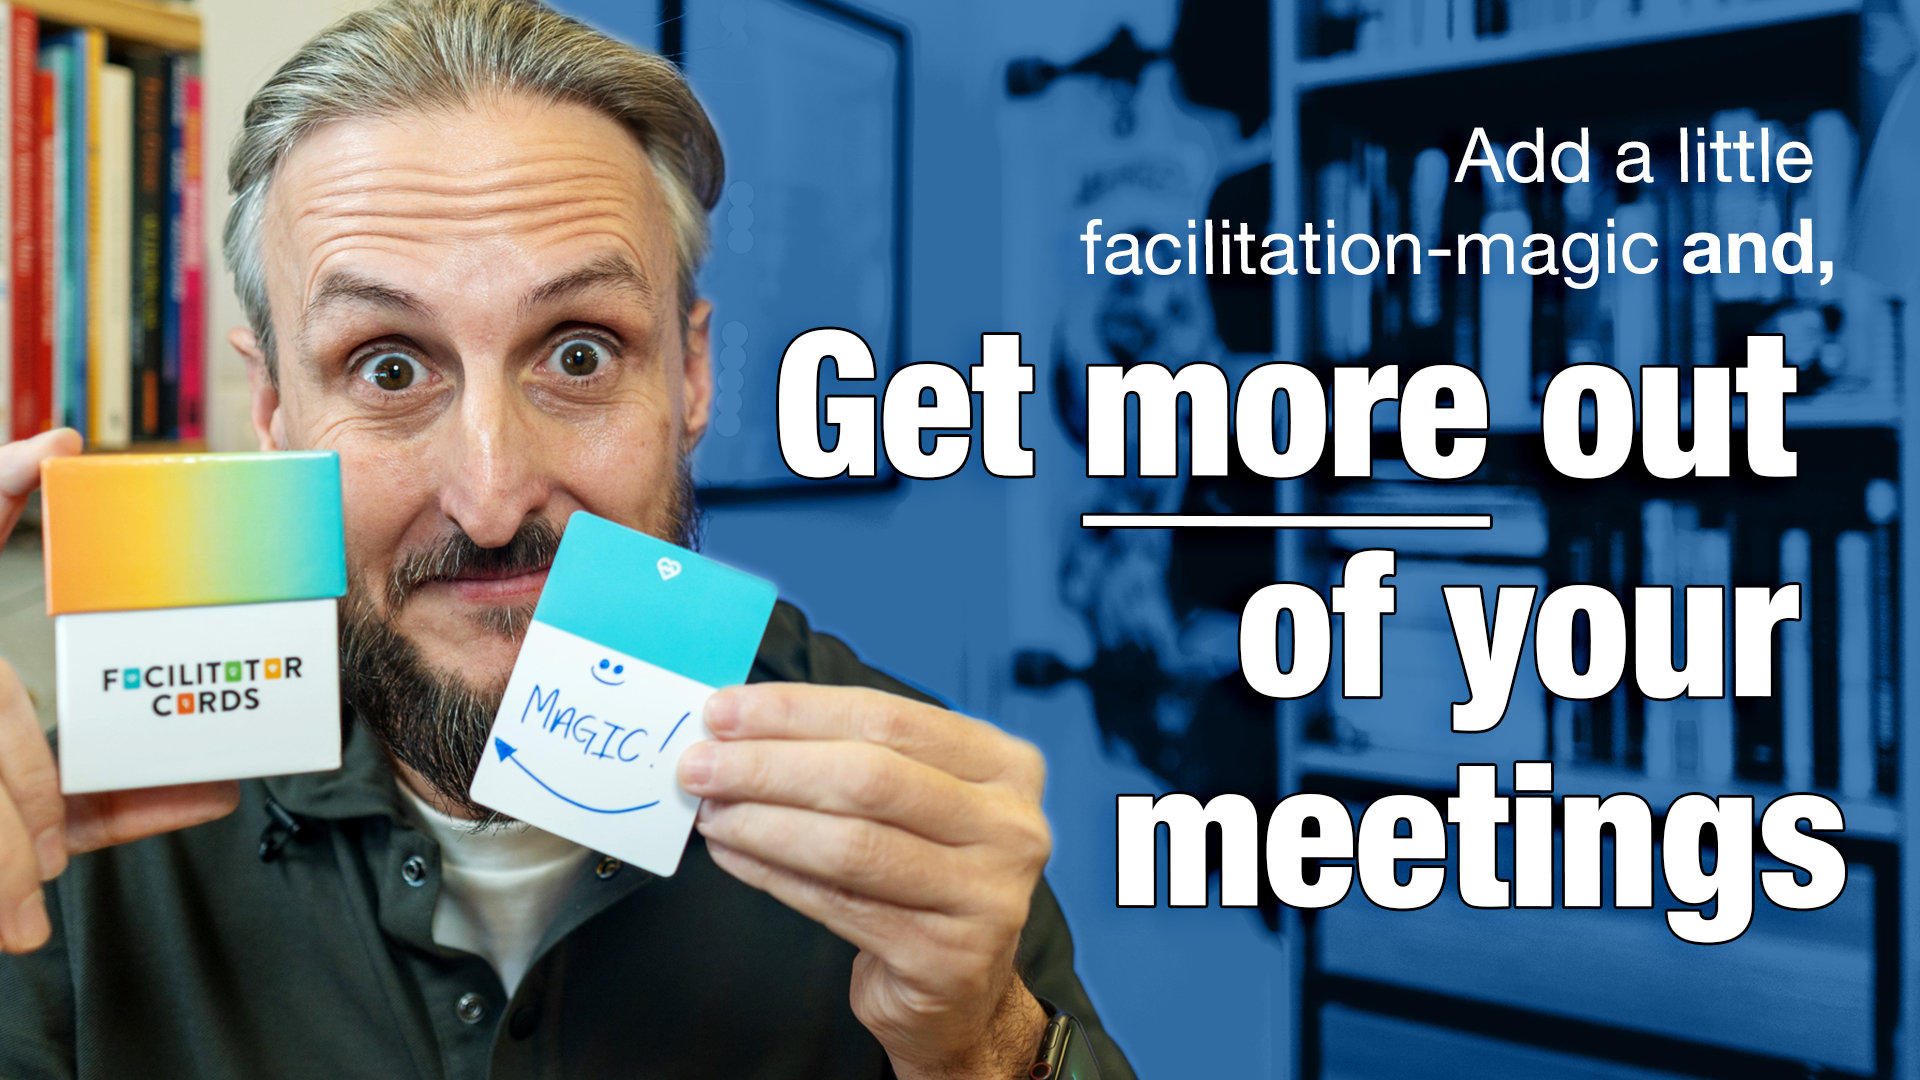 Add a little facilitation-magic and get the most out of your meetings